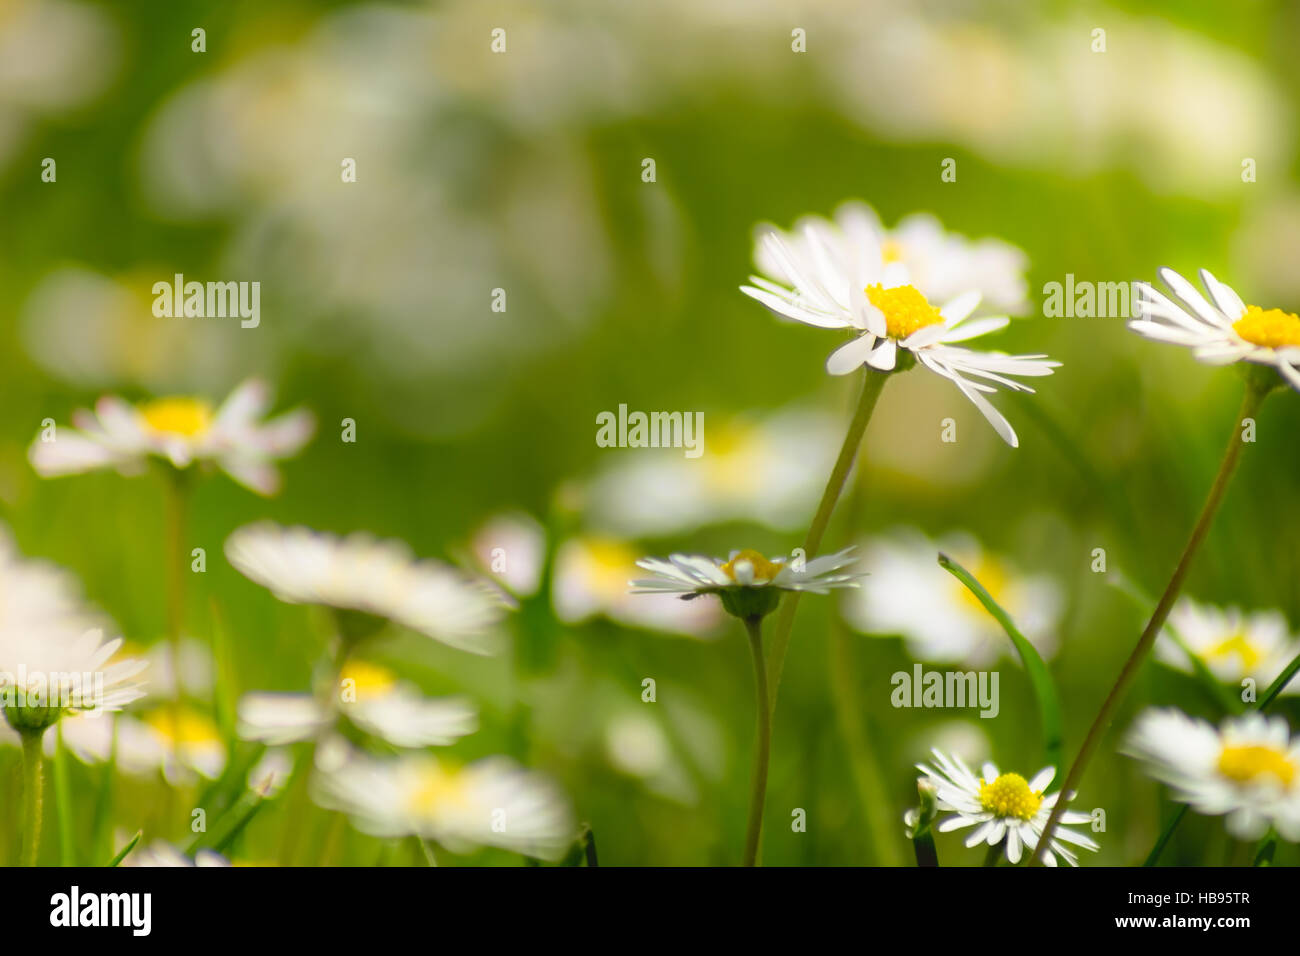 Daisies meadow with sunlight Stock Photo